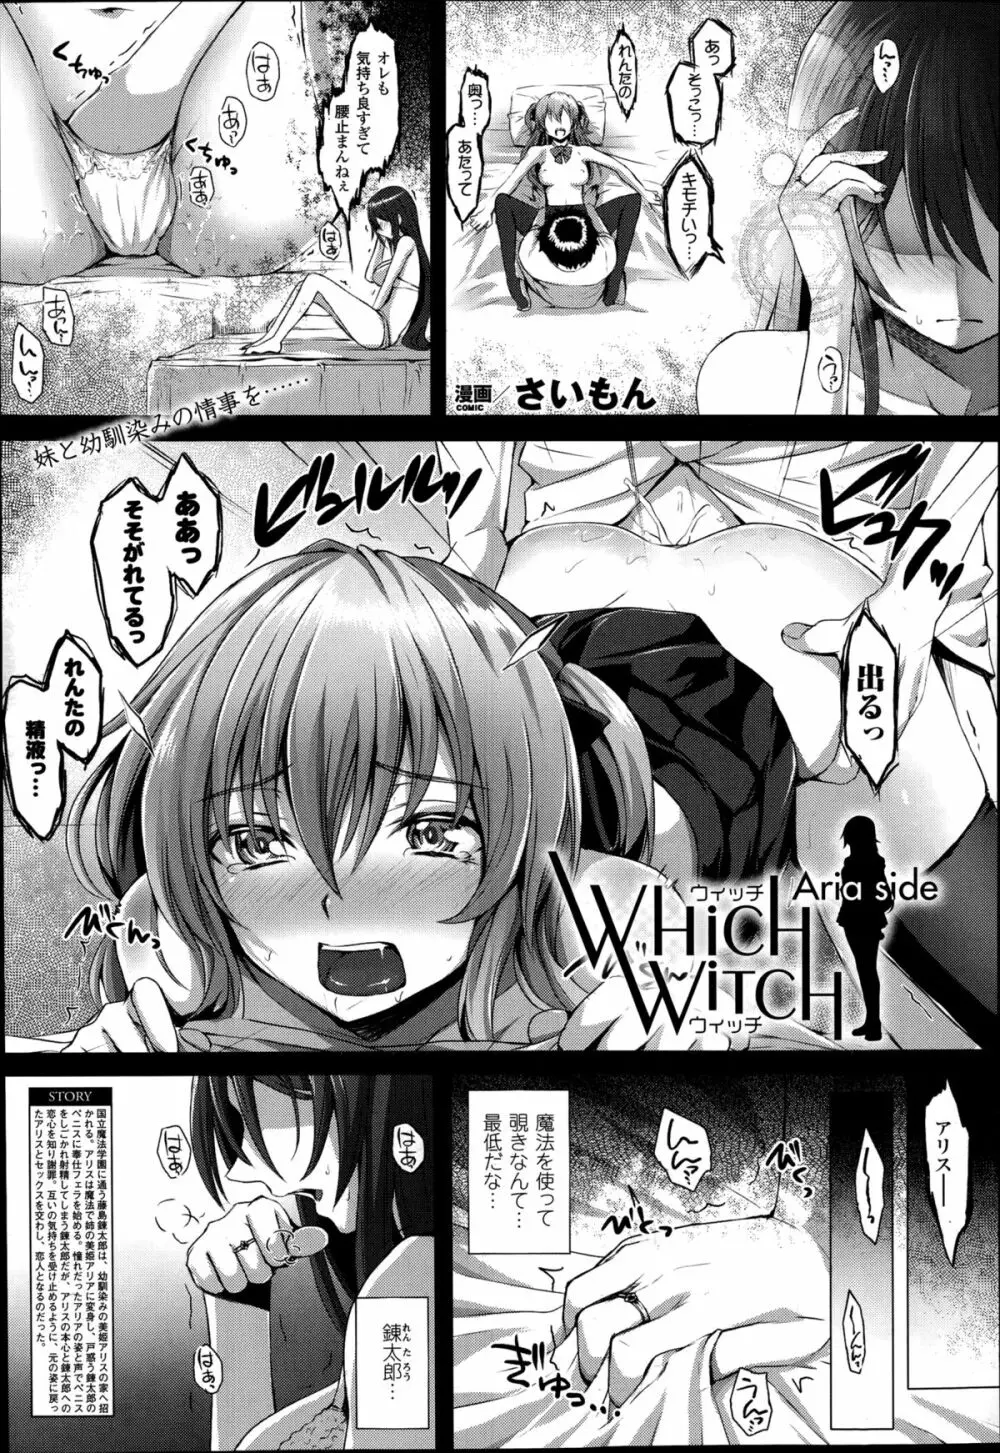 Which Witch 第1-2章 19ページ